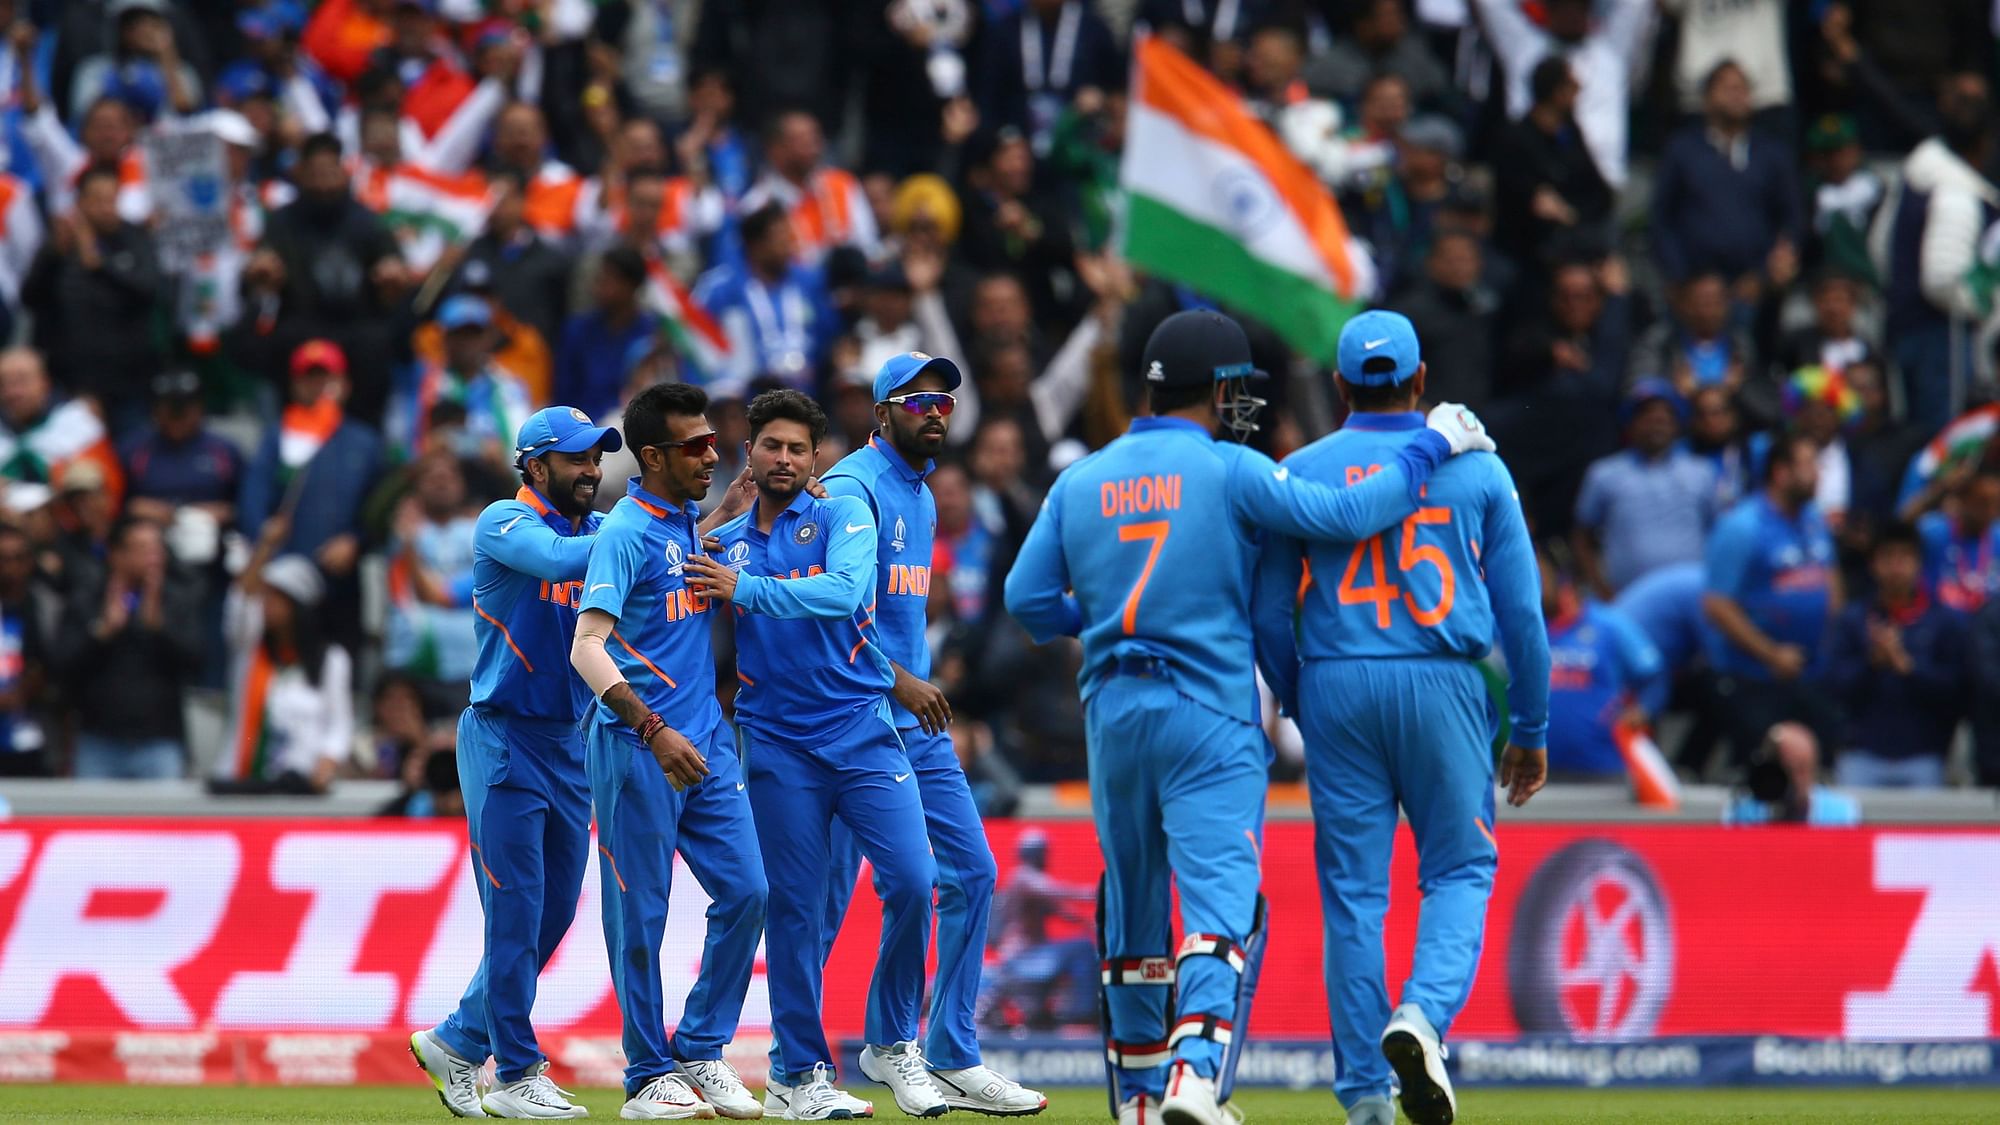 India are now placed third in the point table